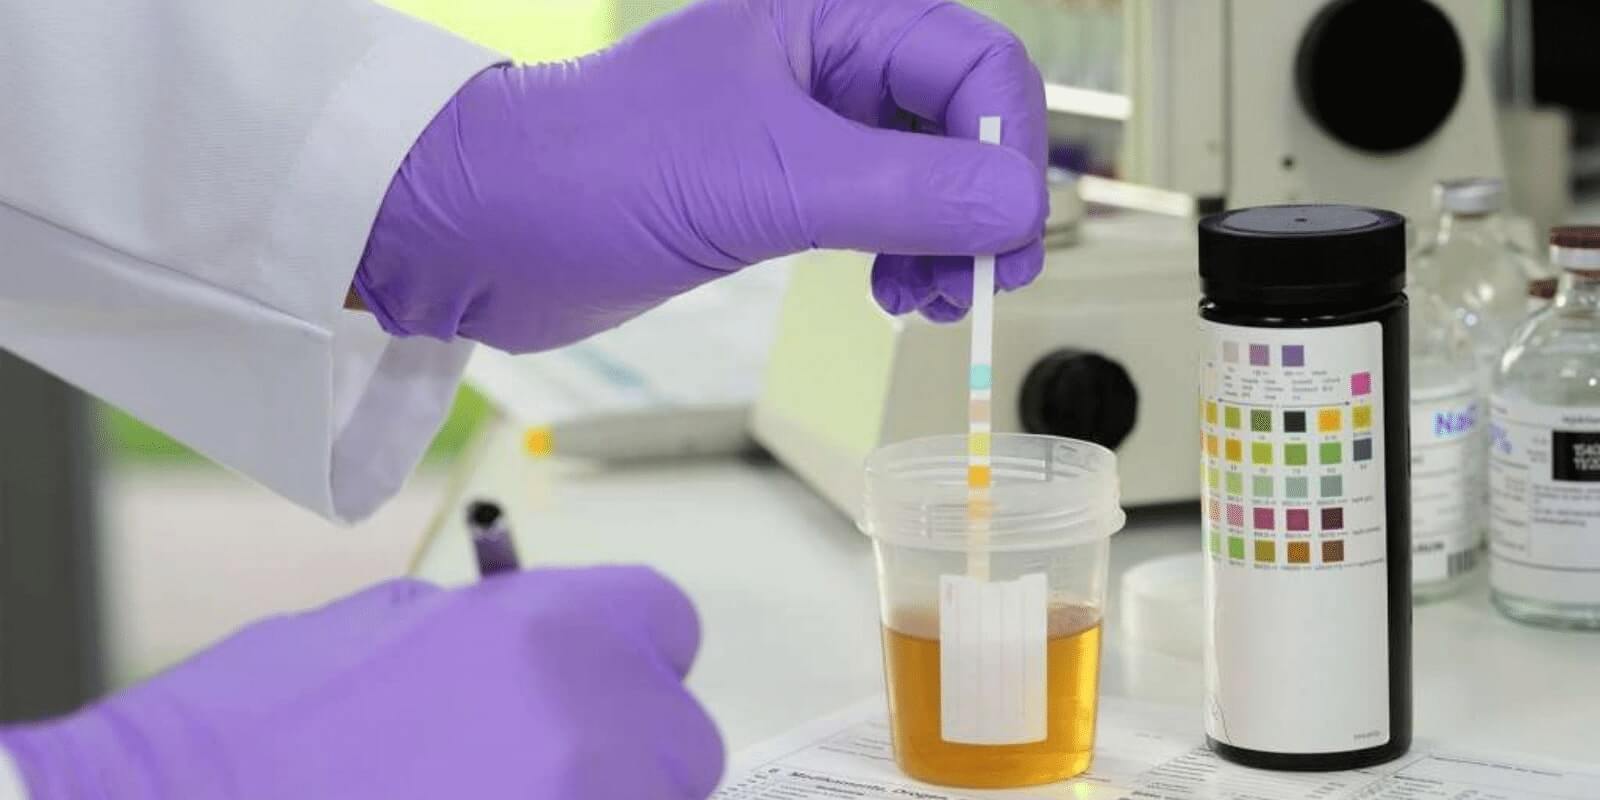 Hands wearing purple lab gloves performing a lab test